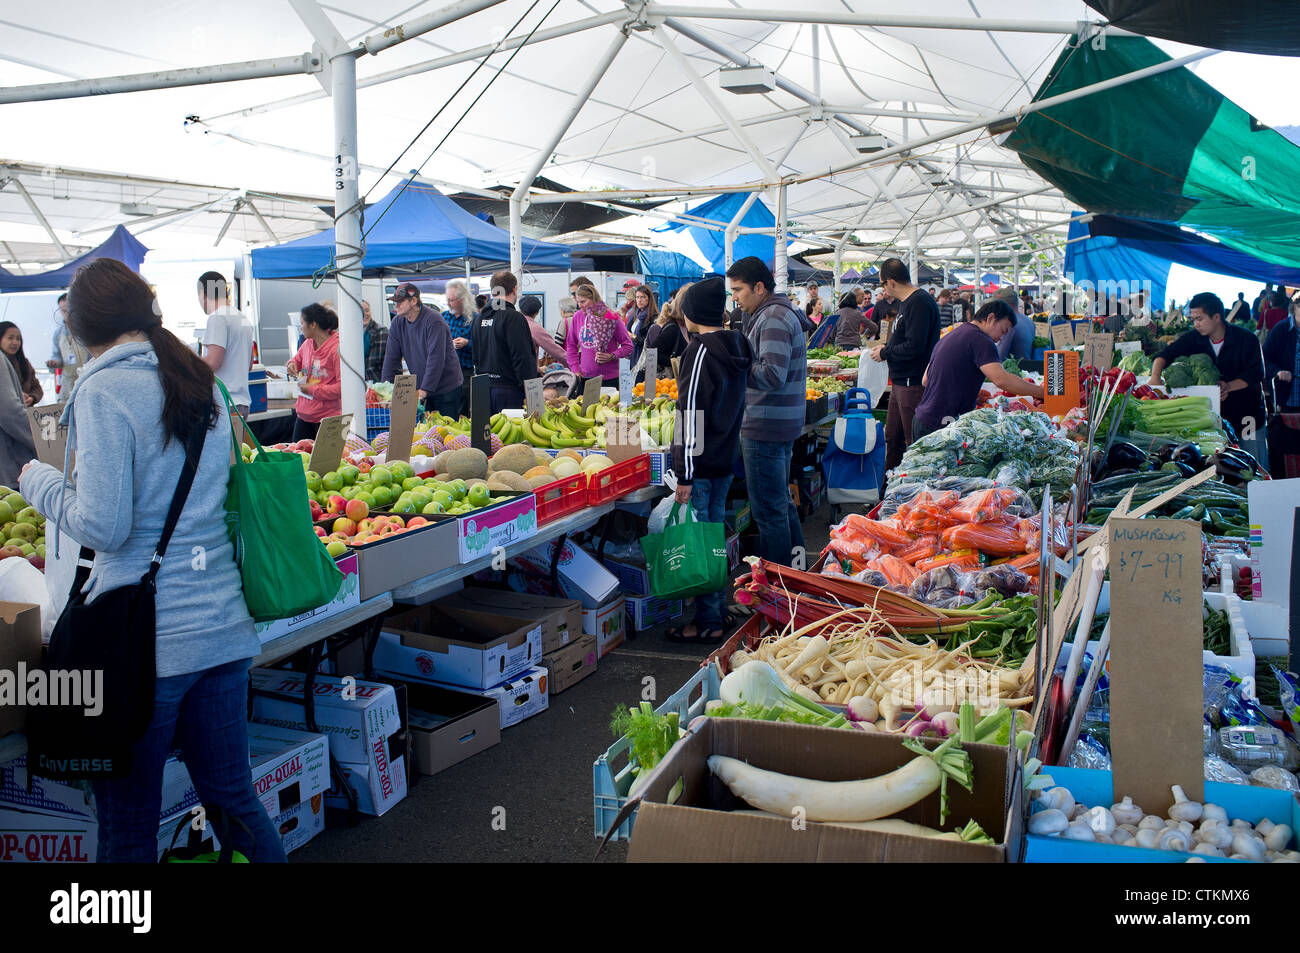 Customers shopping at Rocklea Market in Brisbane Stock Photo